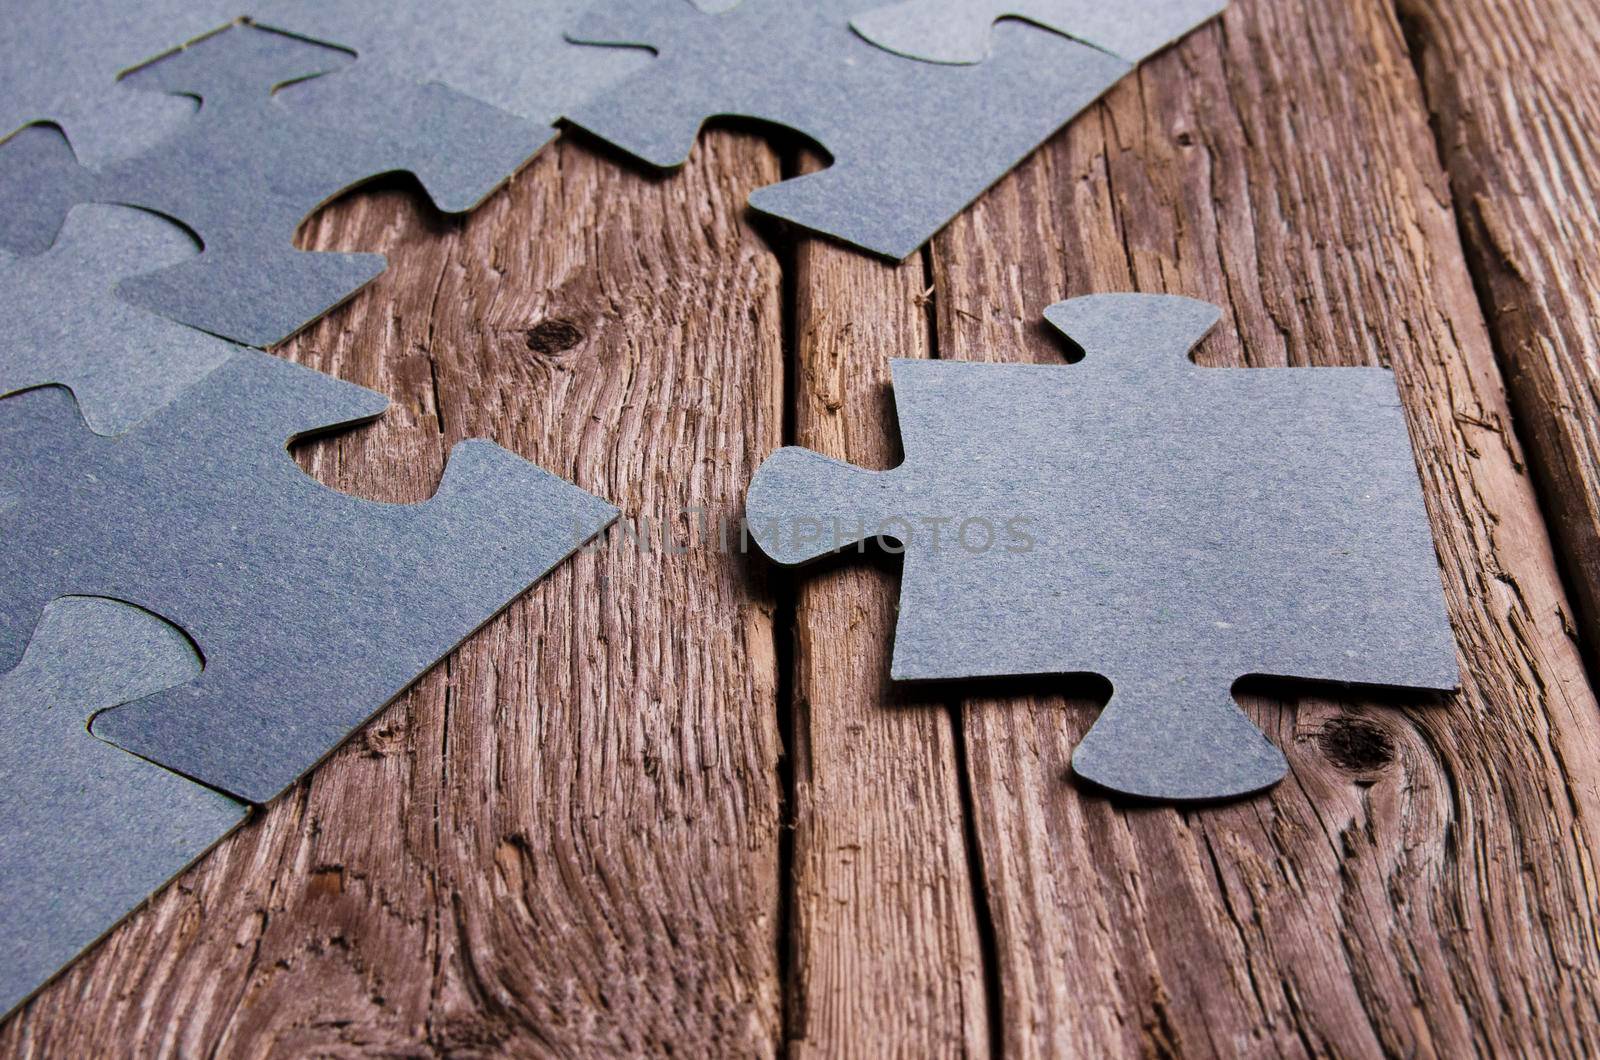 Incomplete puzzles lying on wooden rustic boards. Conceptual of innovation, solution finding and integration. Hand with puzzle piece